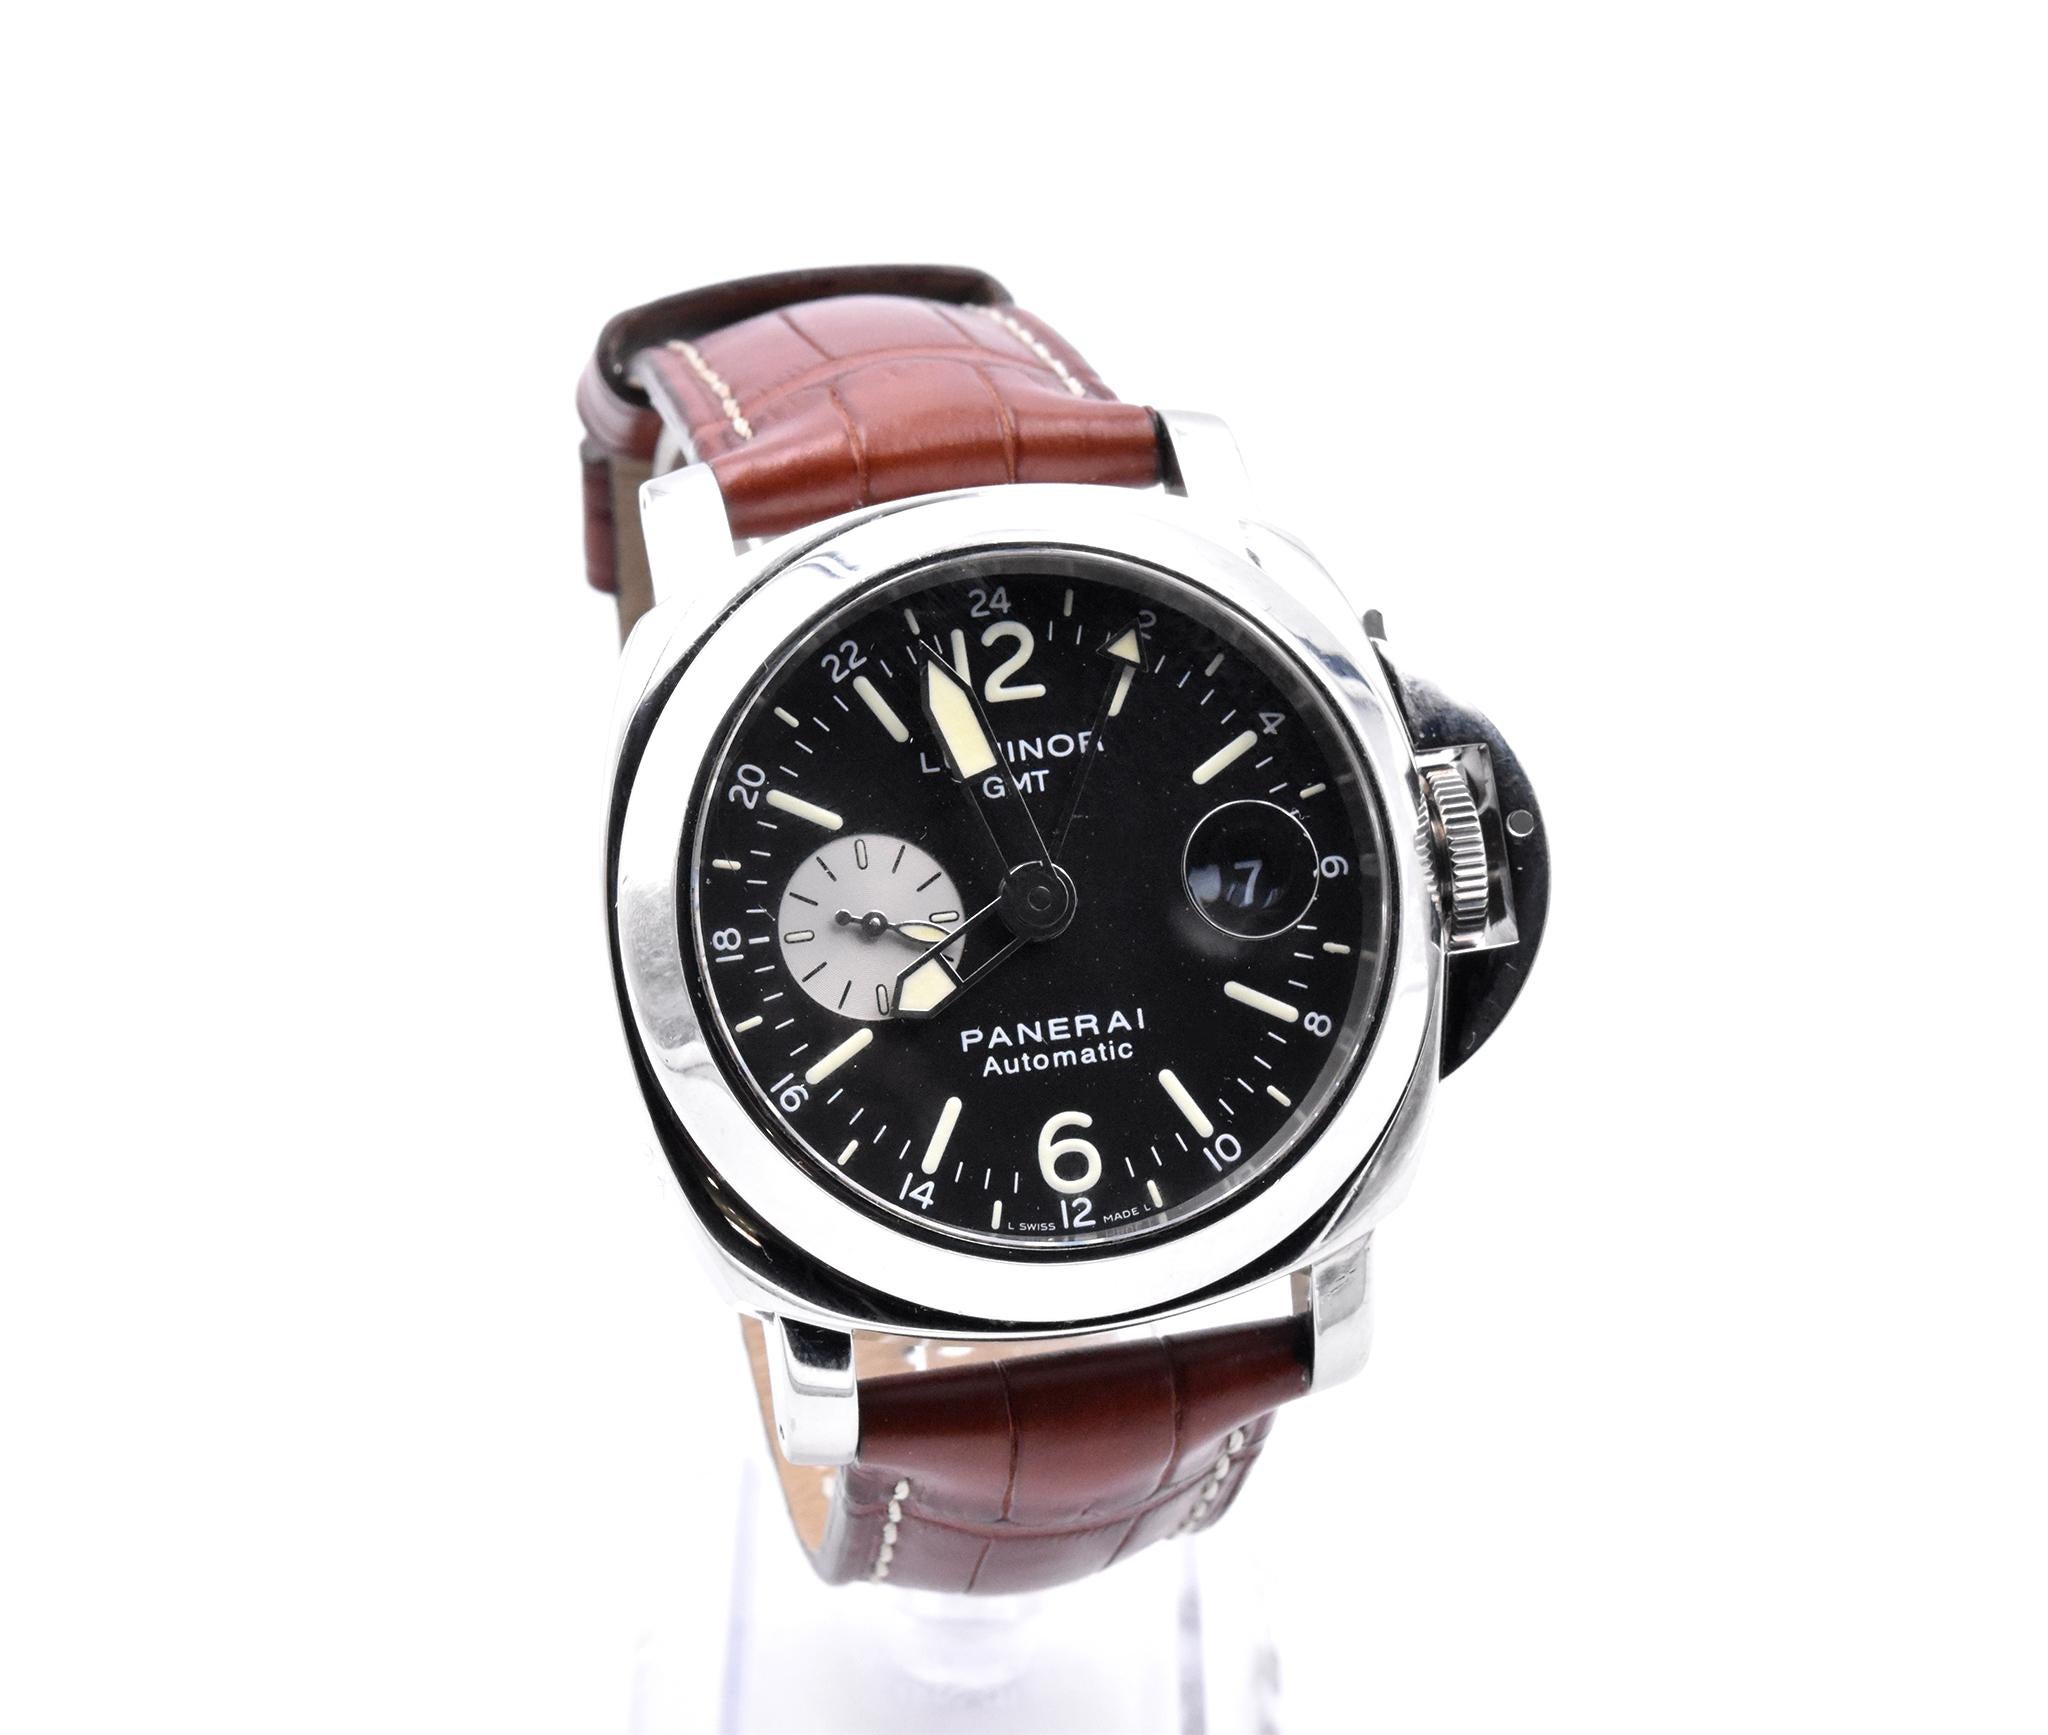 Movement: manual wind movement
Function: Hours, minutes, small seconds, date, GMT
Case: 44mm stainless steel case, sapphire crystal, smooth bezel, push-pull crown
Band: Brown Leather and Black Rubber Strap
Dial: Black GMT dial, date at 3 o’clock